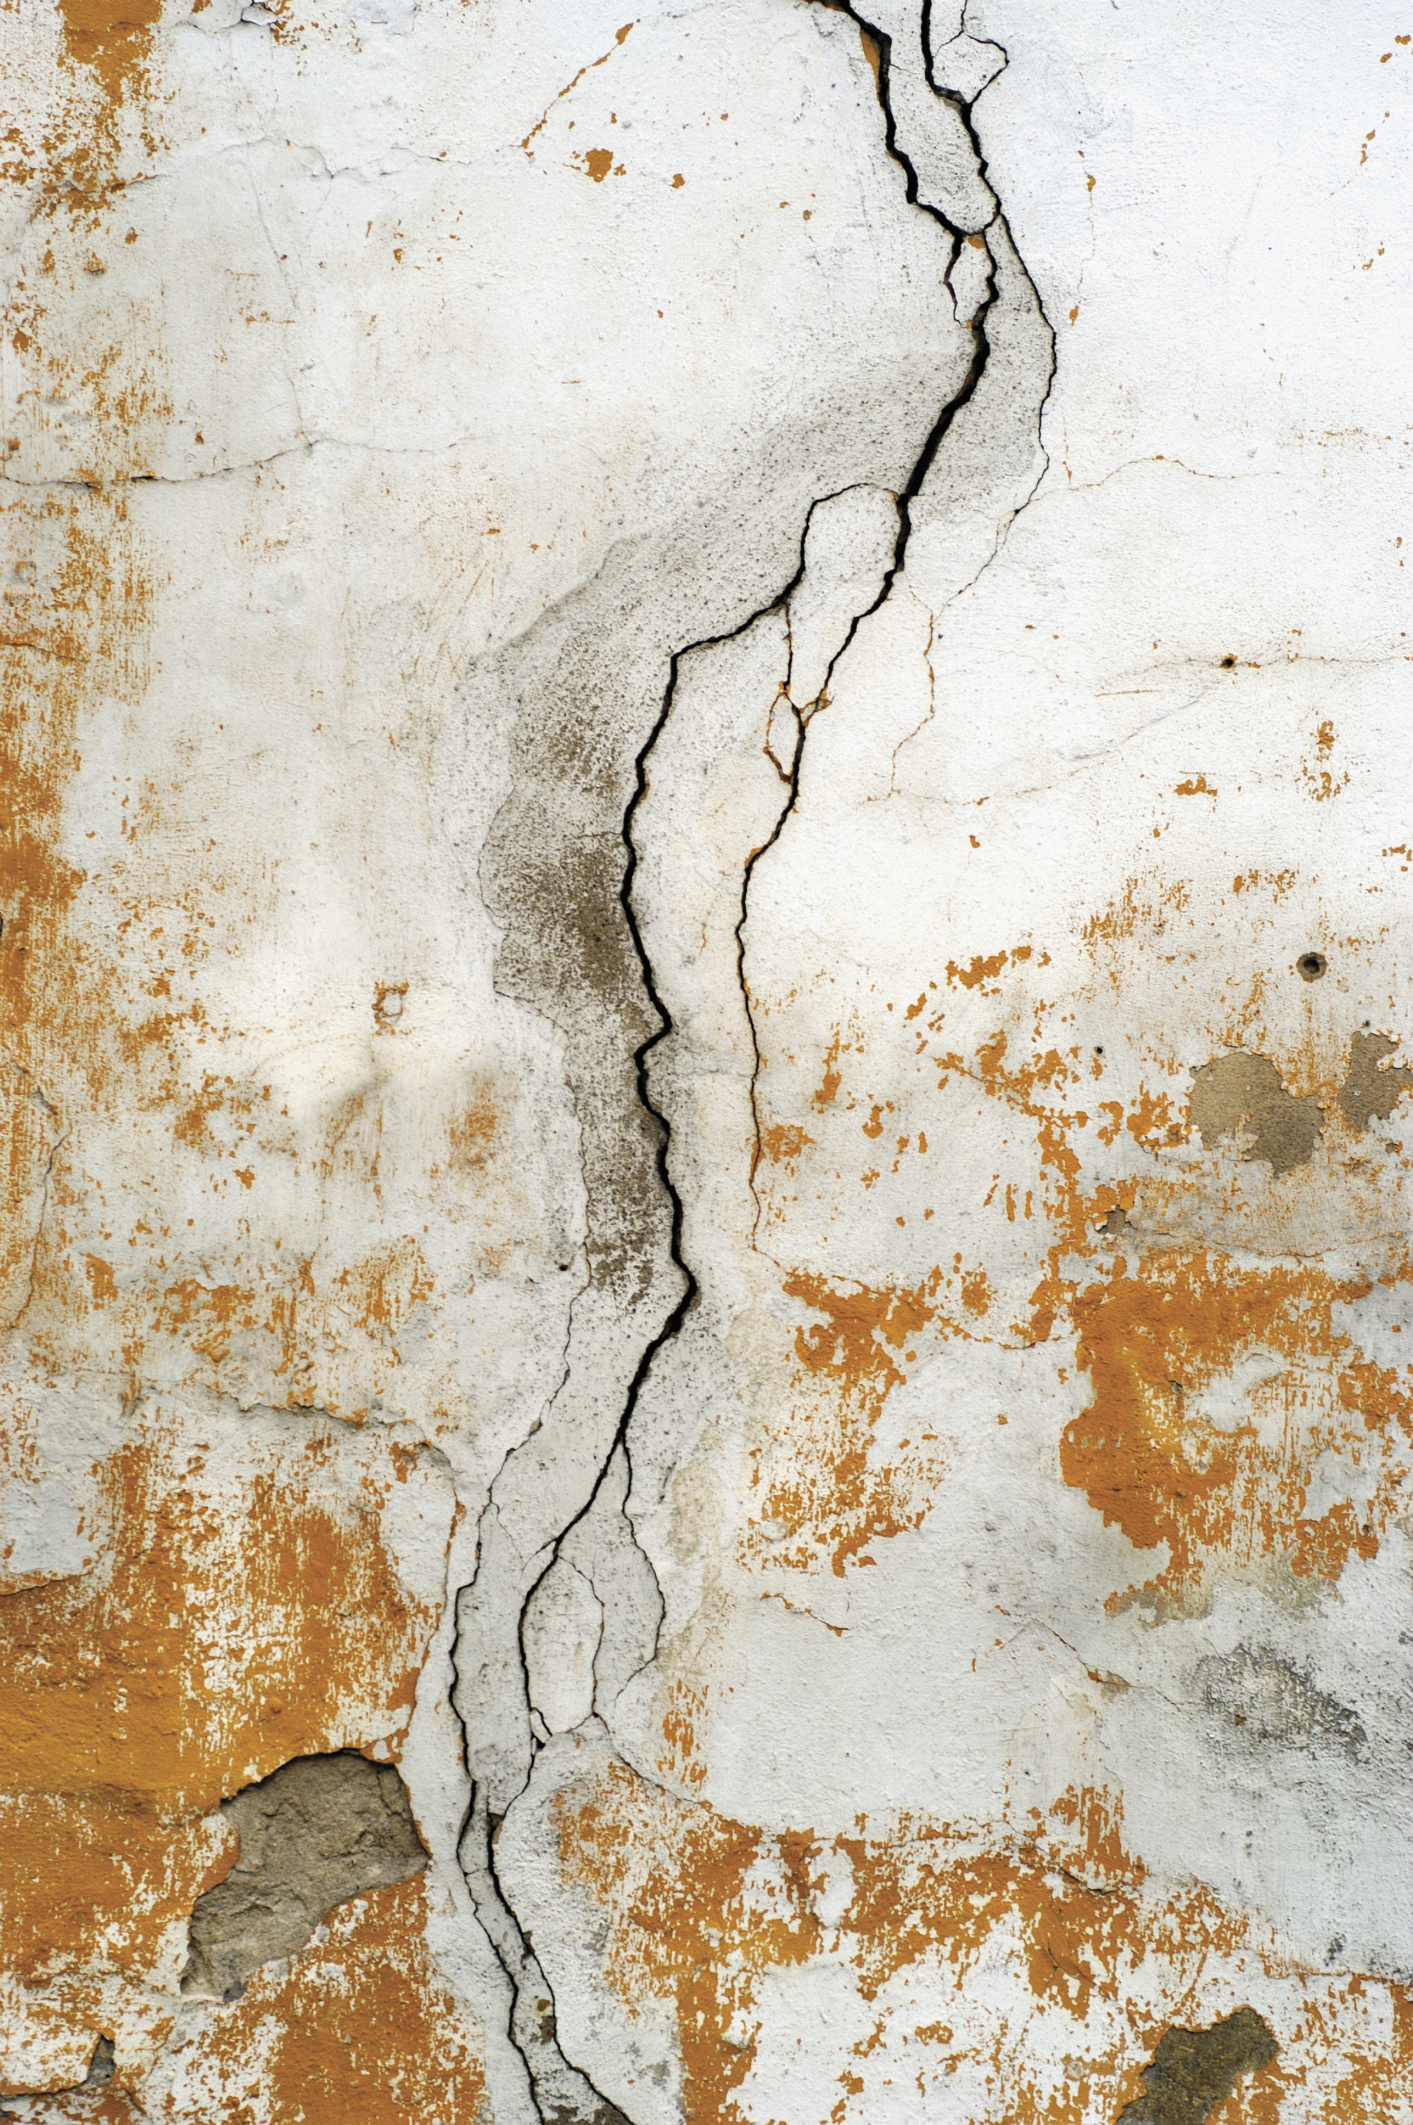 How to Determine if the Cracks in Walls Are Serious | Home Guides ...